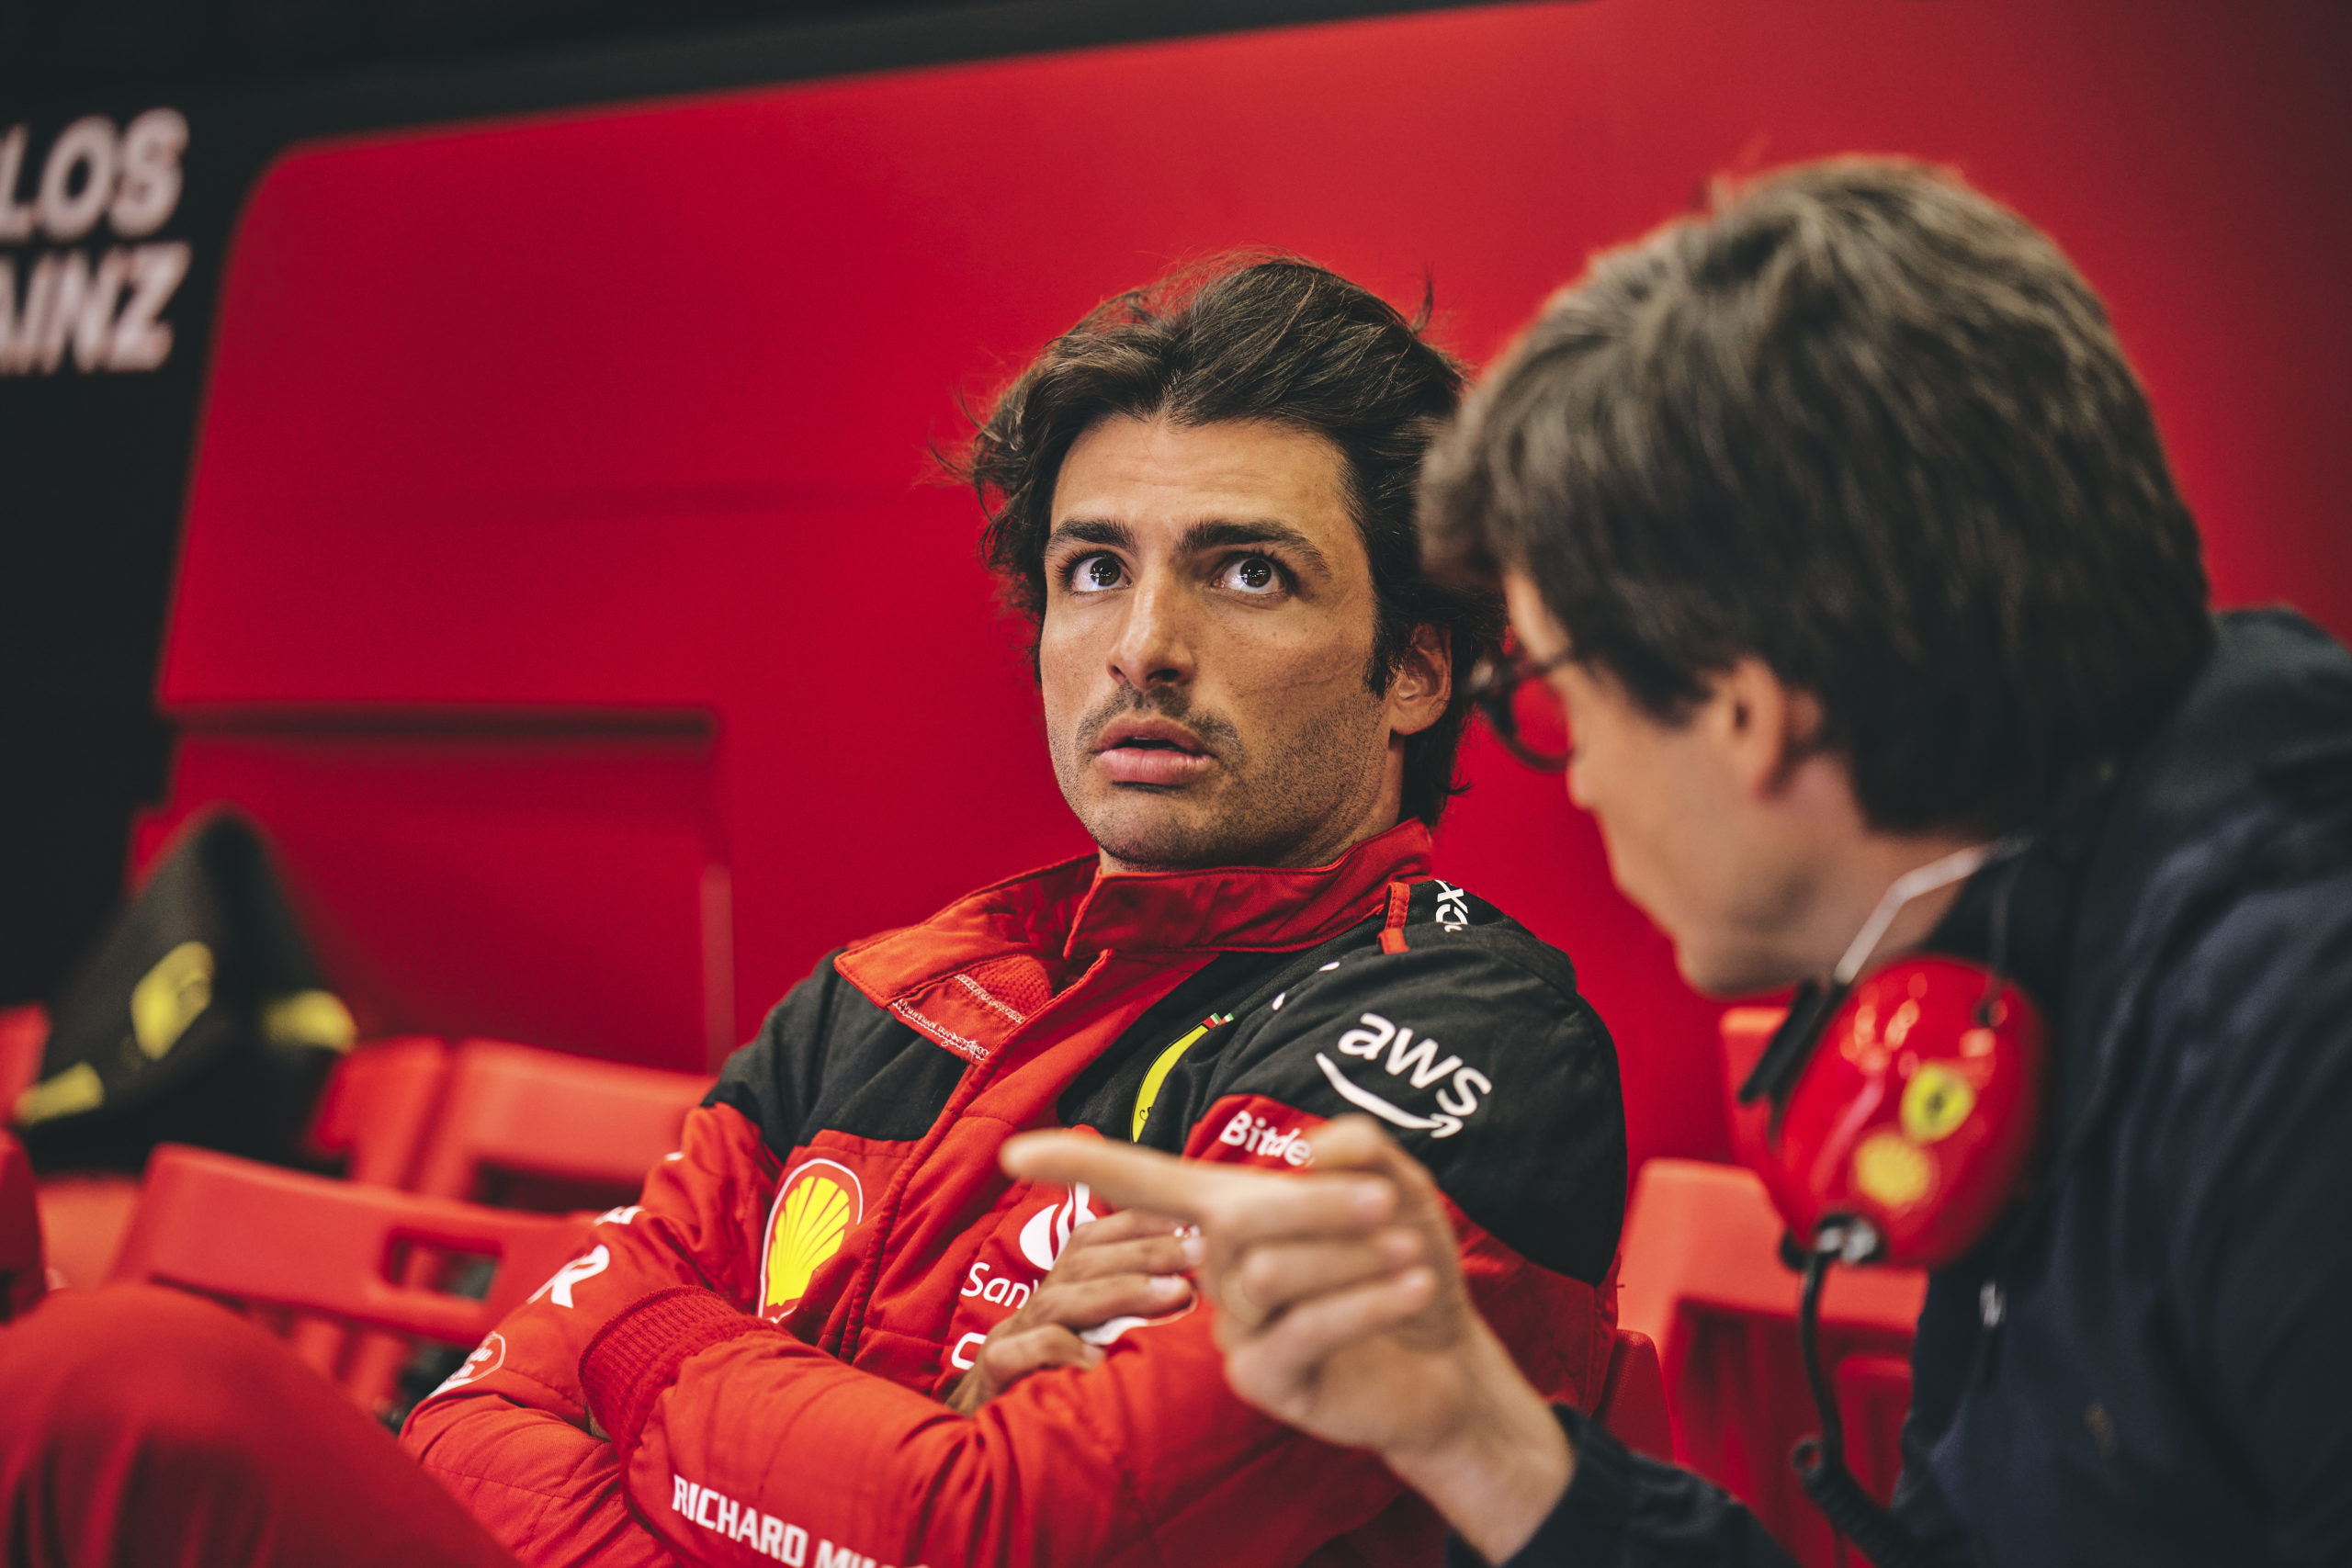 sainz excelled when ferrari might not have even scored